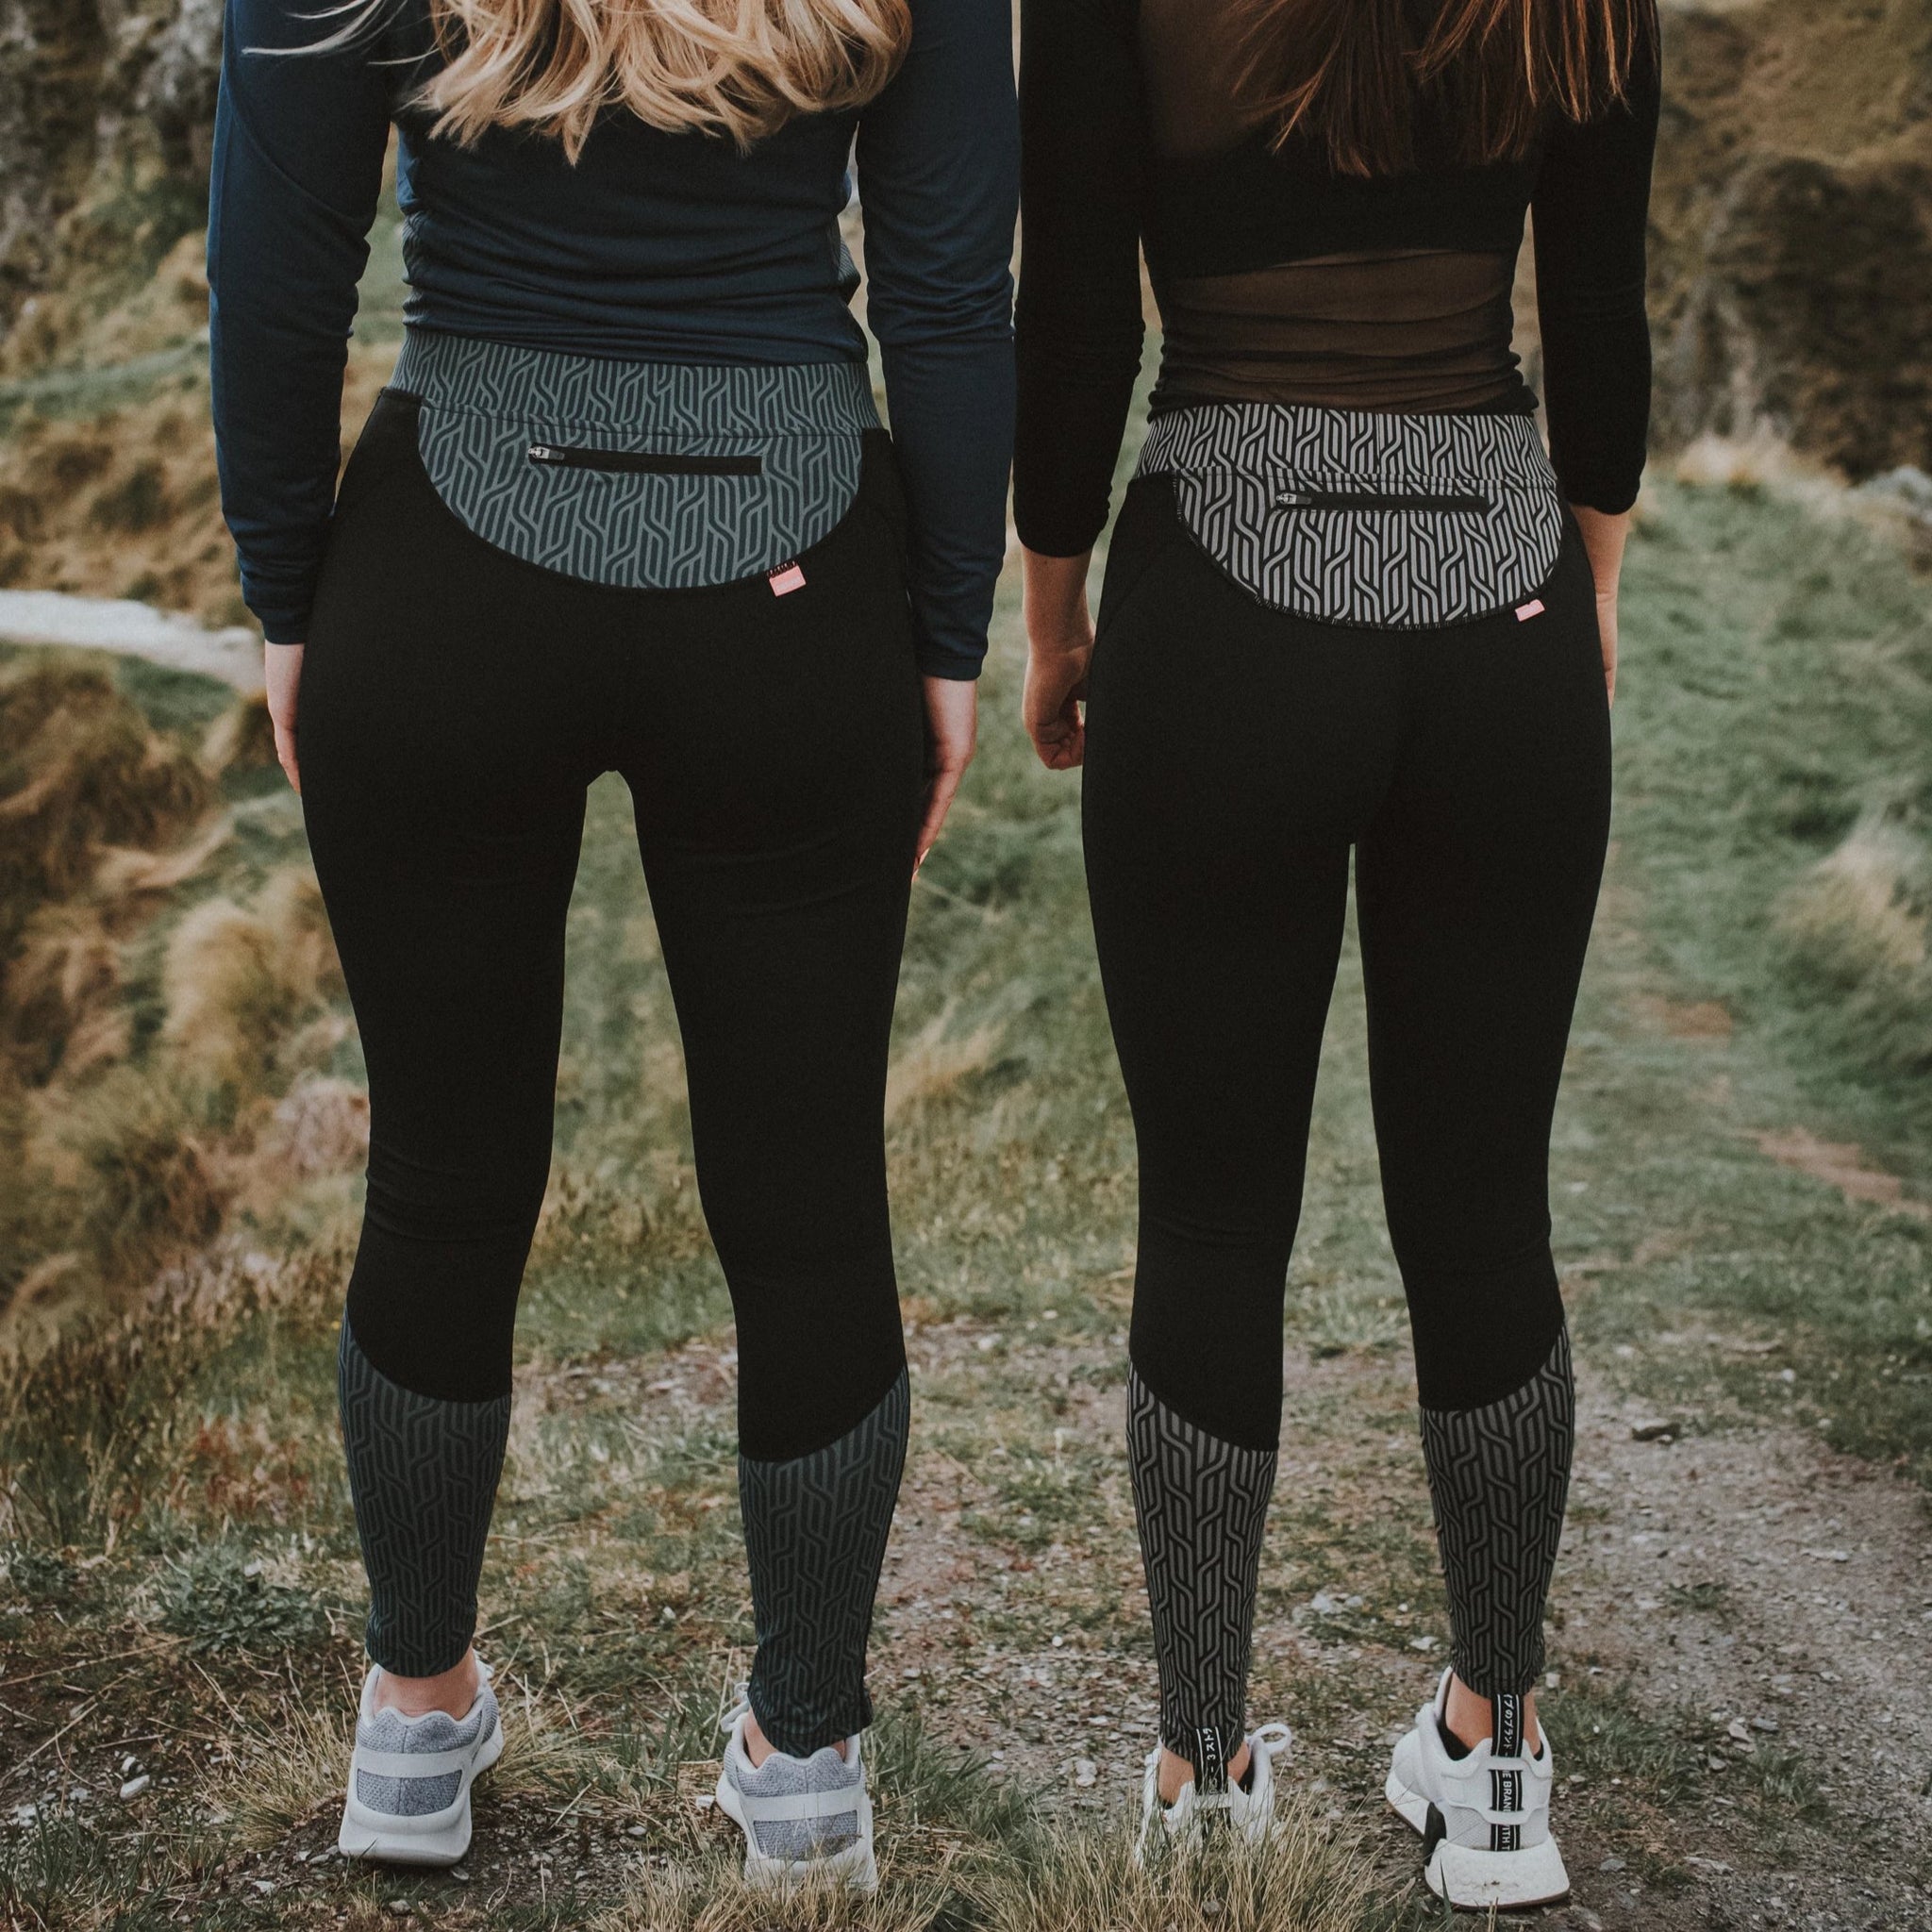 The most comfortable leggings that don't fall down when you exercise a